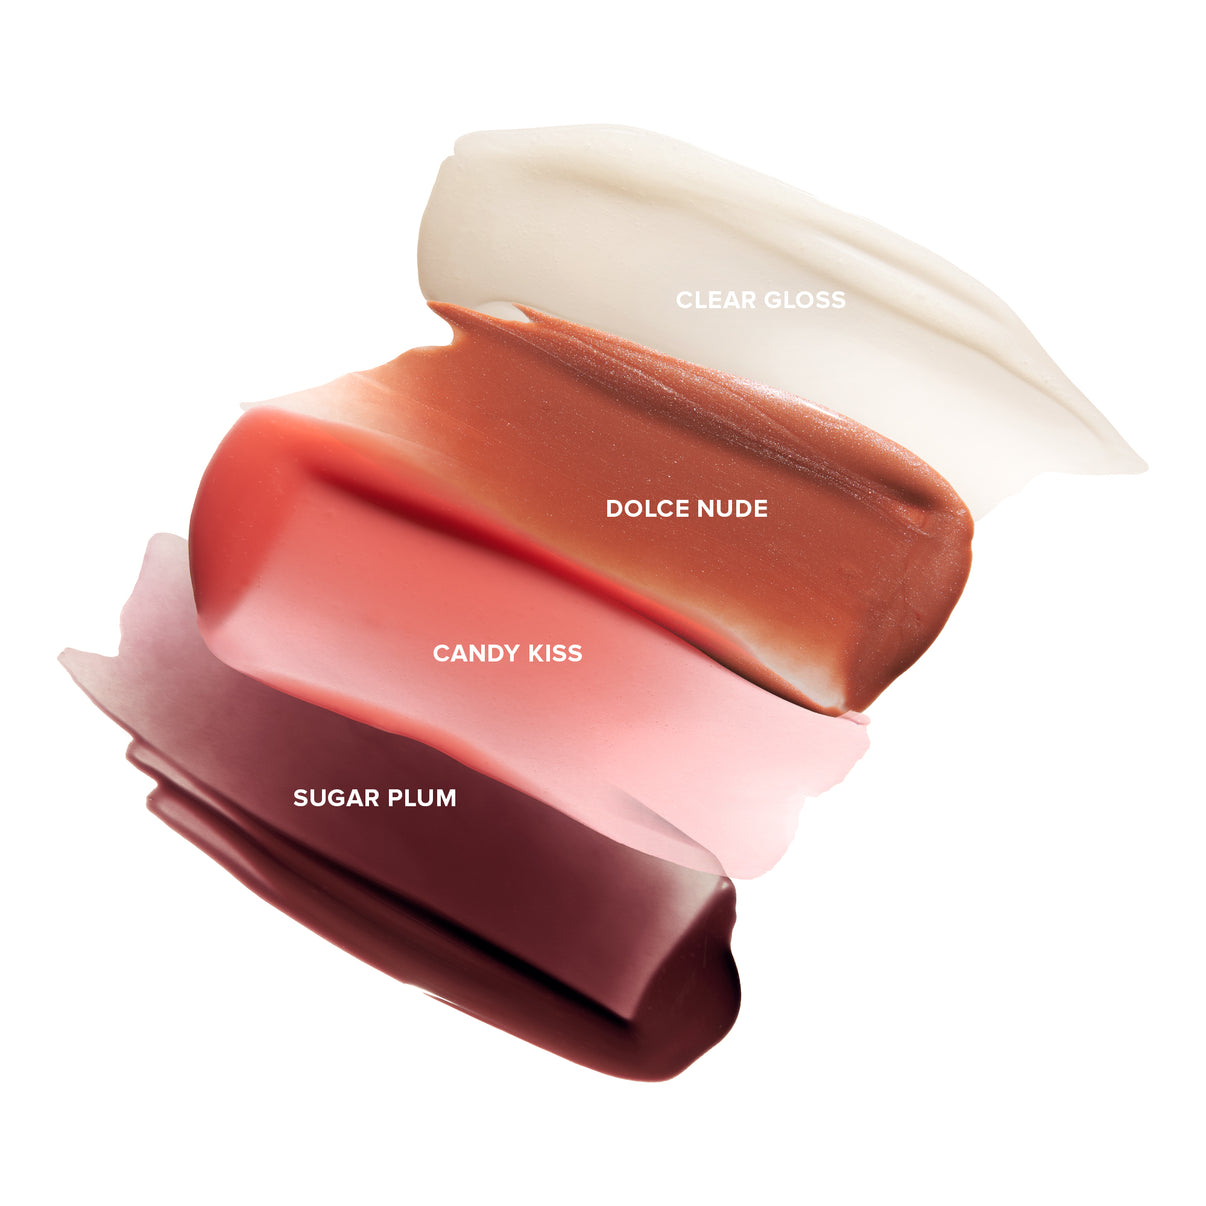  Candy kiss: Hydrating Peptide Lip Butter swatches 